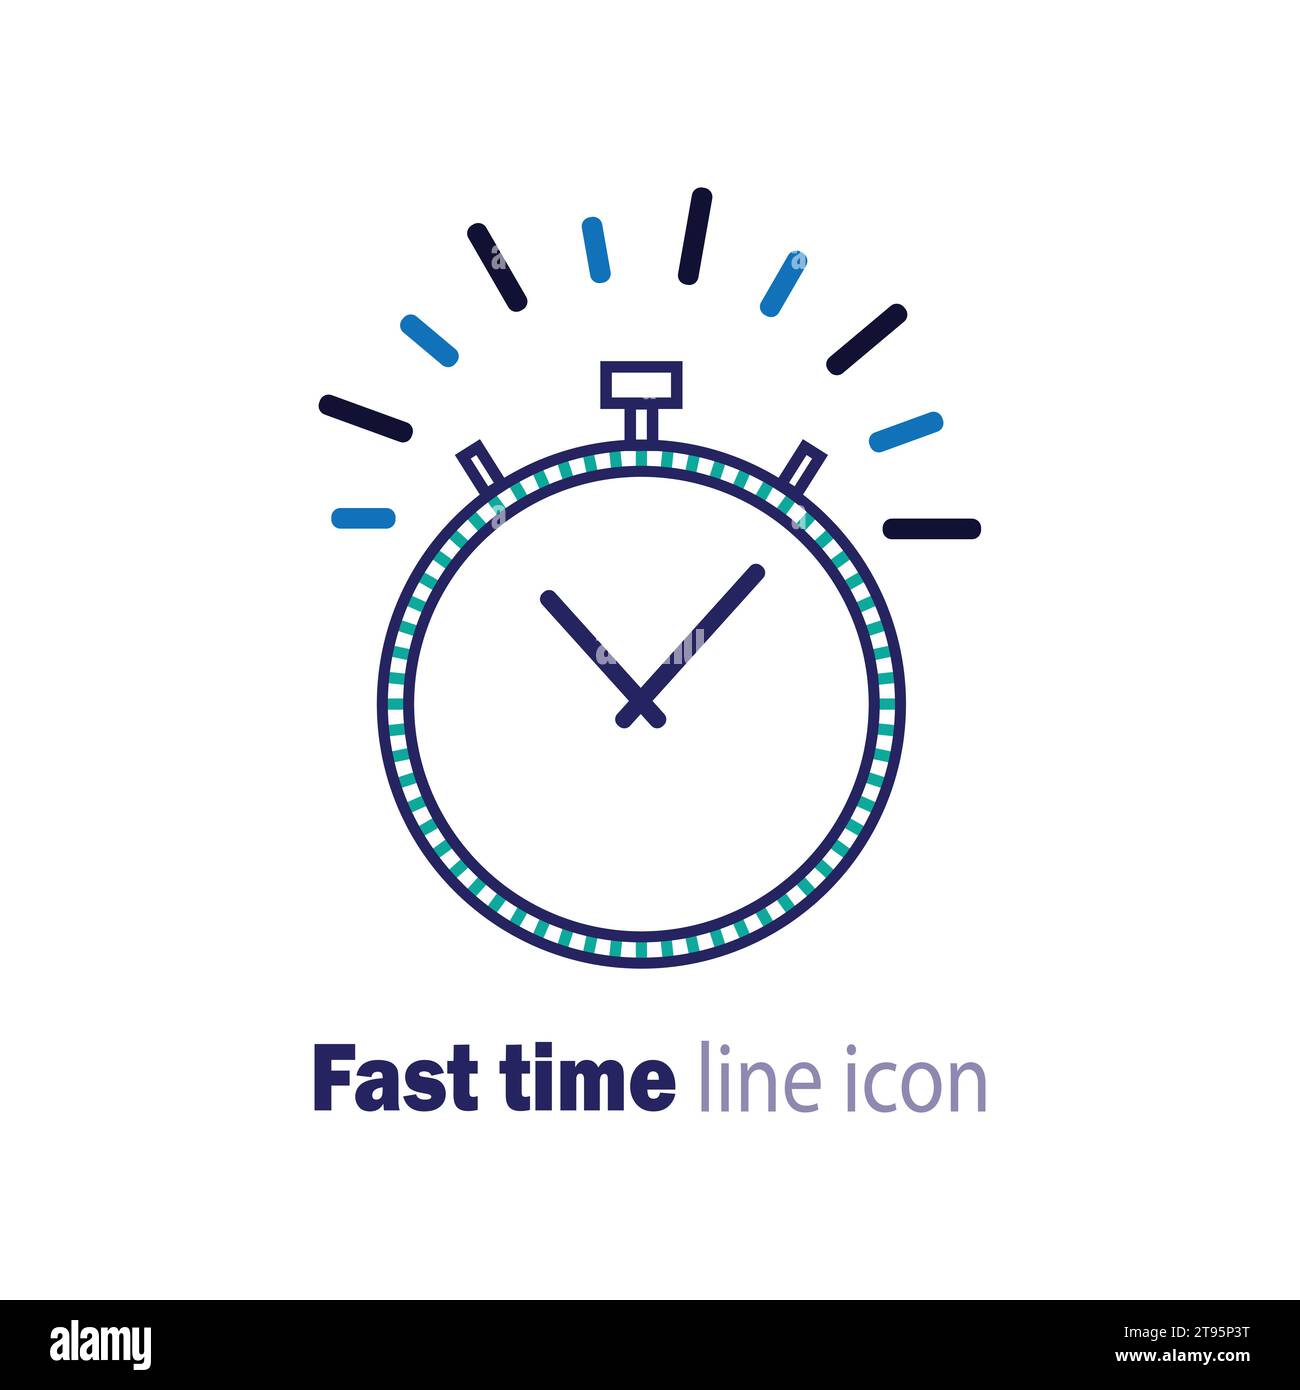 Fast time icon. Stopwatch icon. Time management concept. Vector illustration. Stock Vector